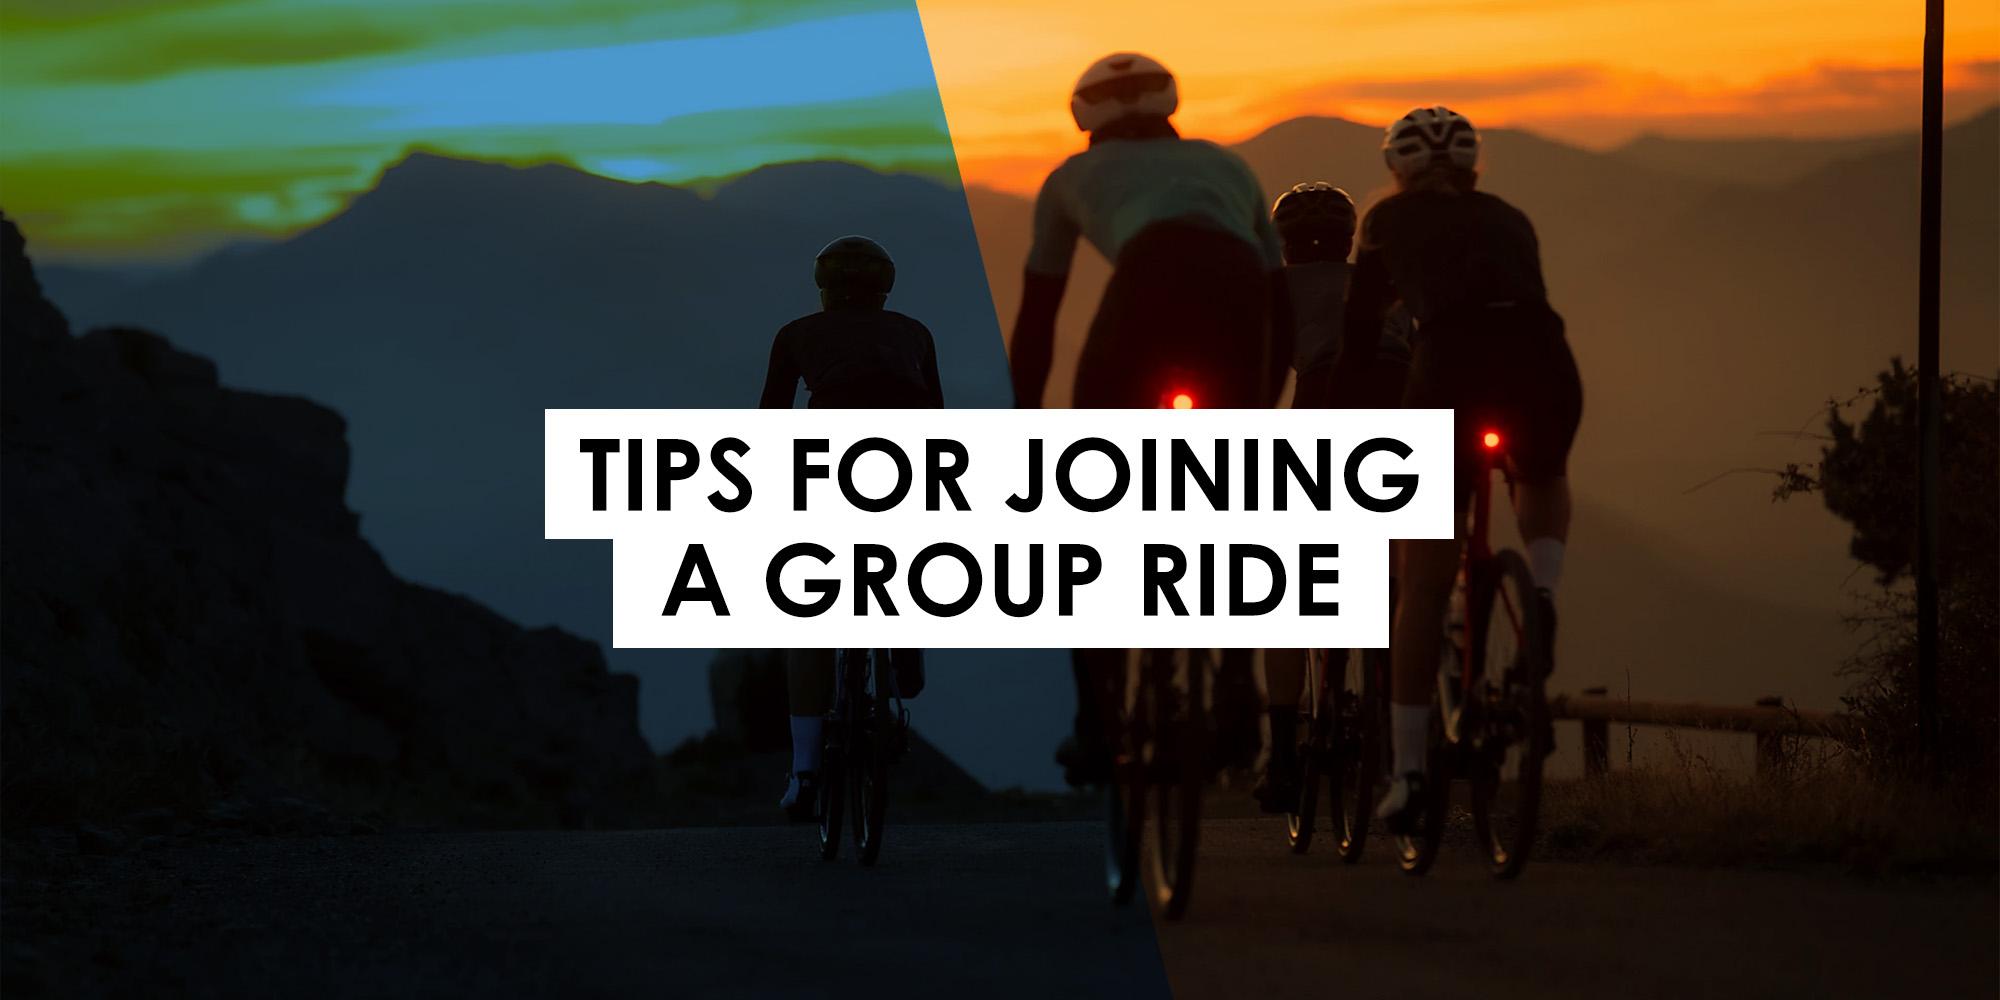 Tips for new cyclists joining group rides